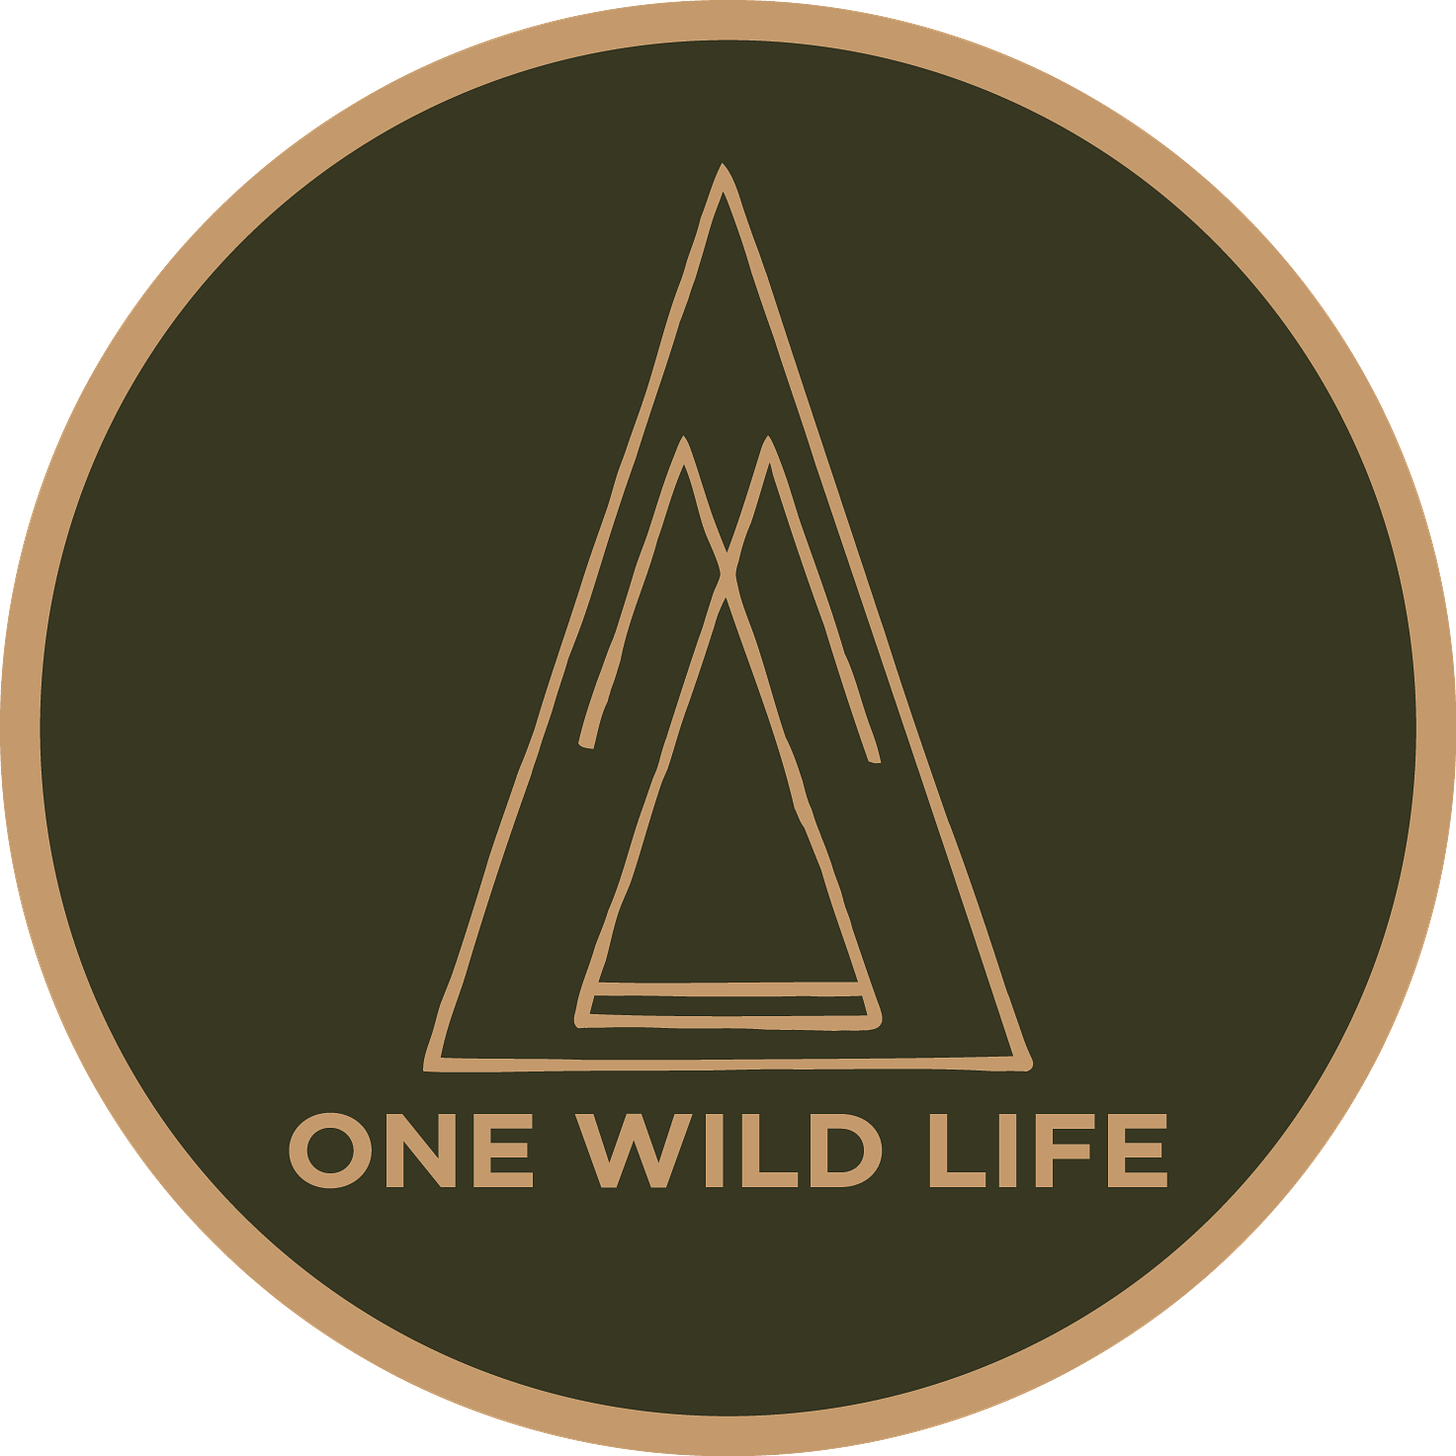 One Wild Life Co logo circle. Green background with gold trim.